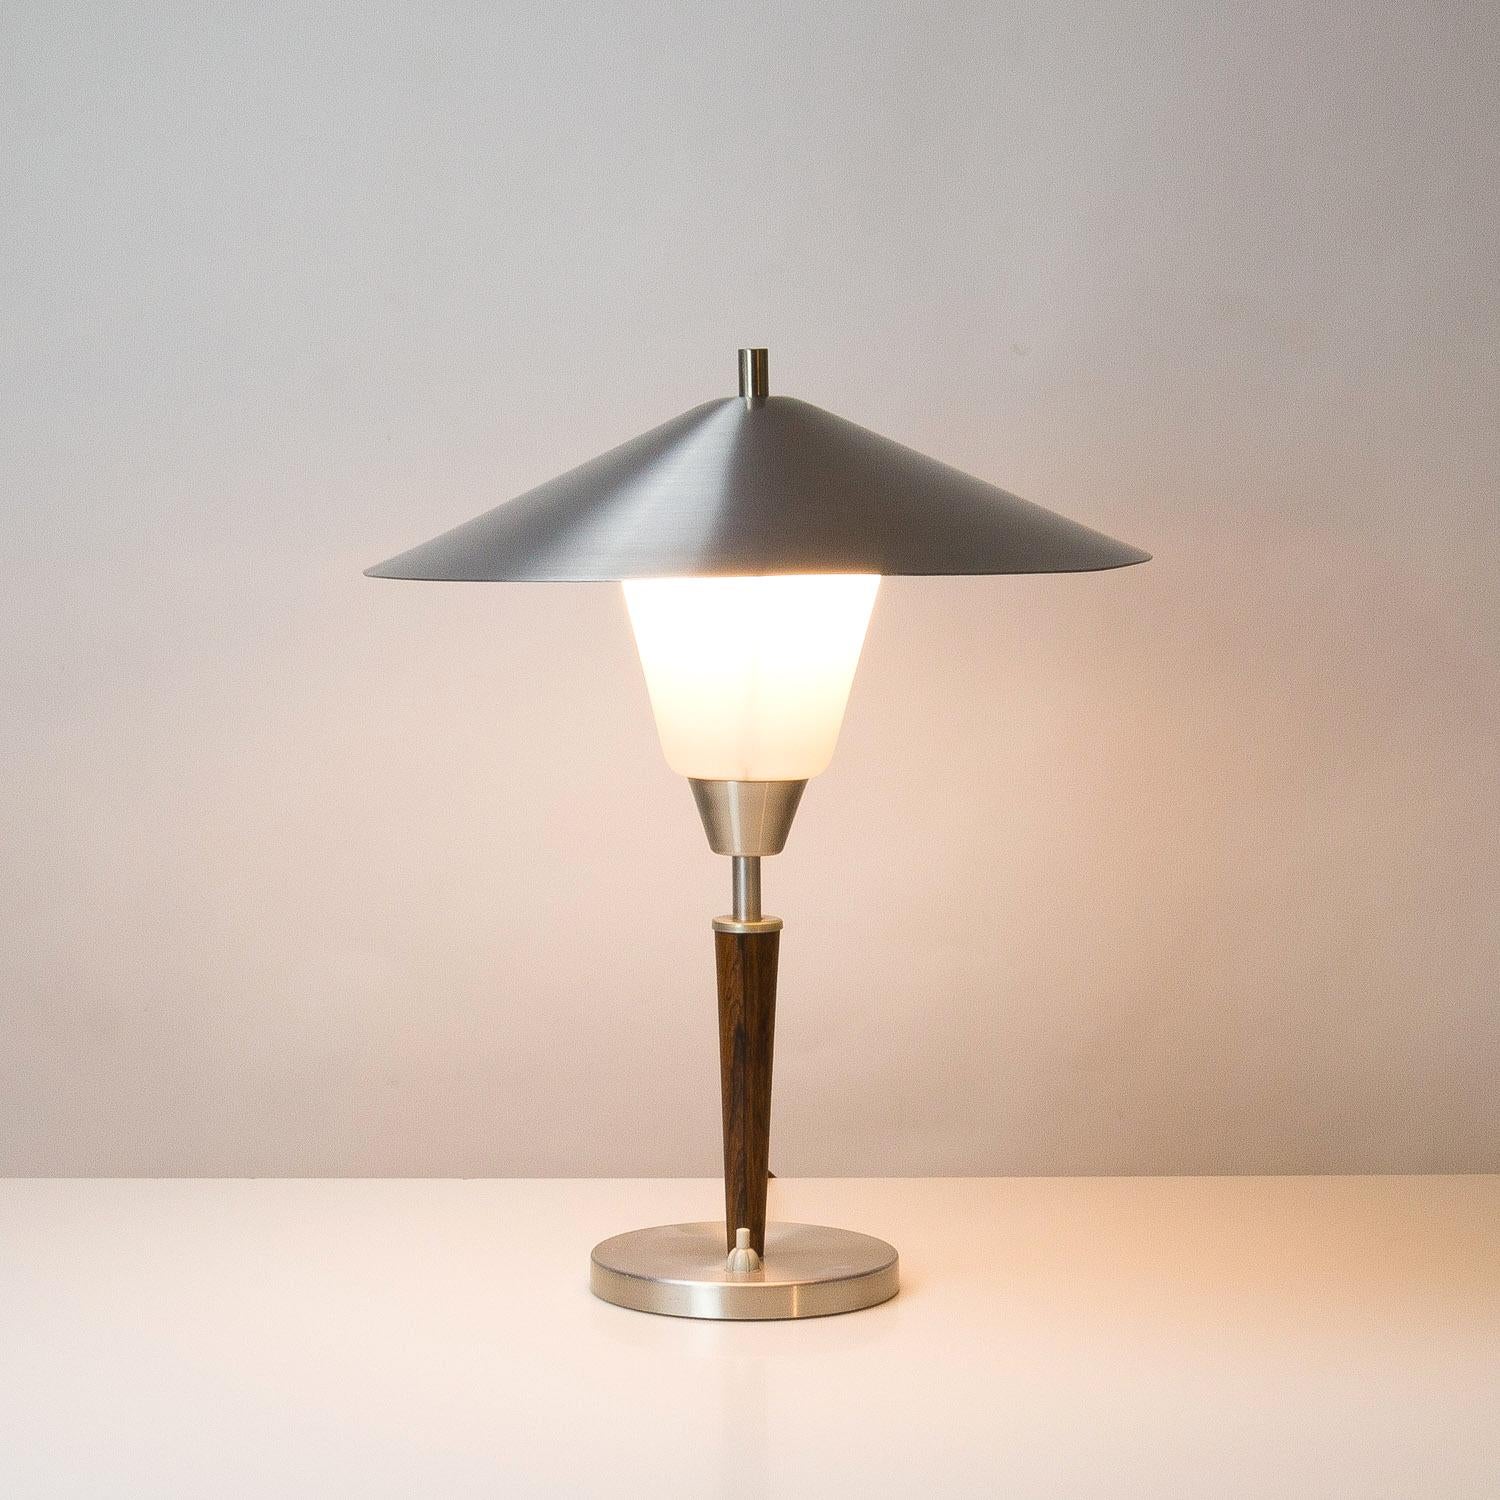 A rare 1950s rosewood, aluminium and opaline glass table lamp by Fog & Mørup, Denmark.
    